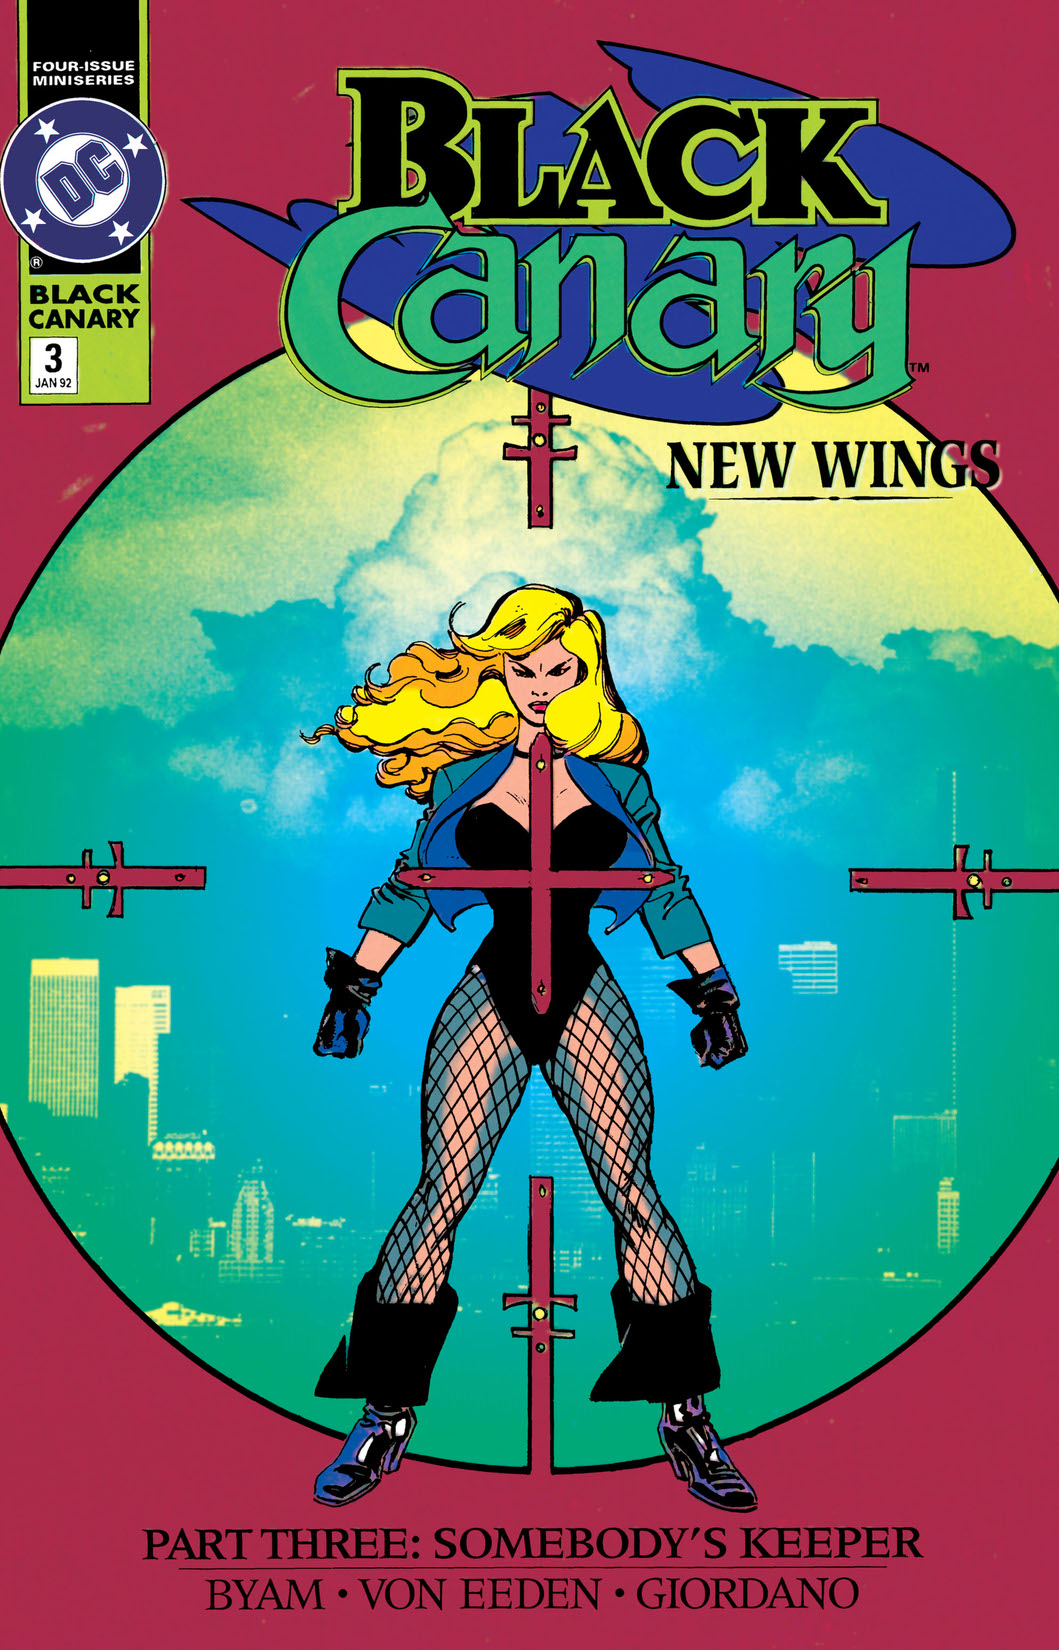 Black Canary (1991-) #3 preview images